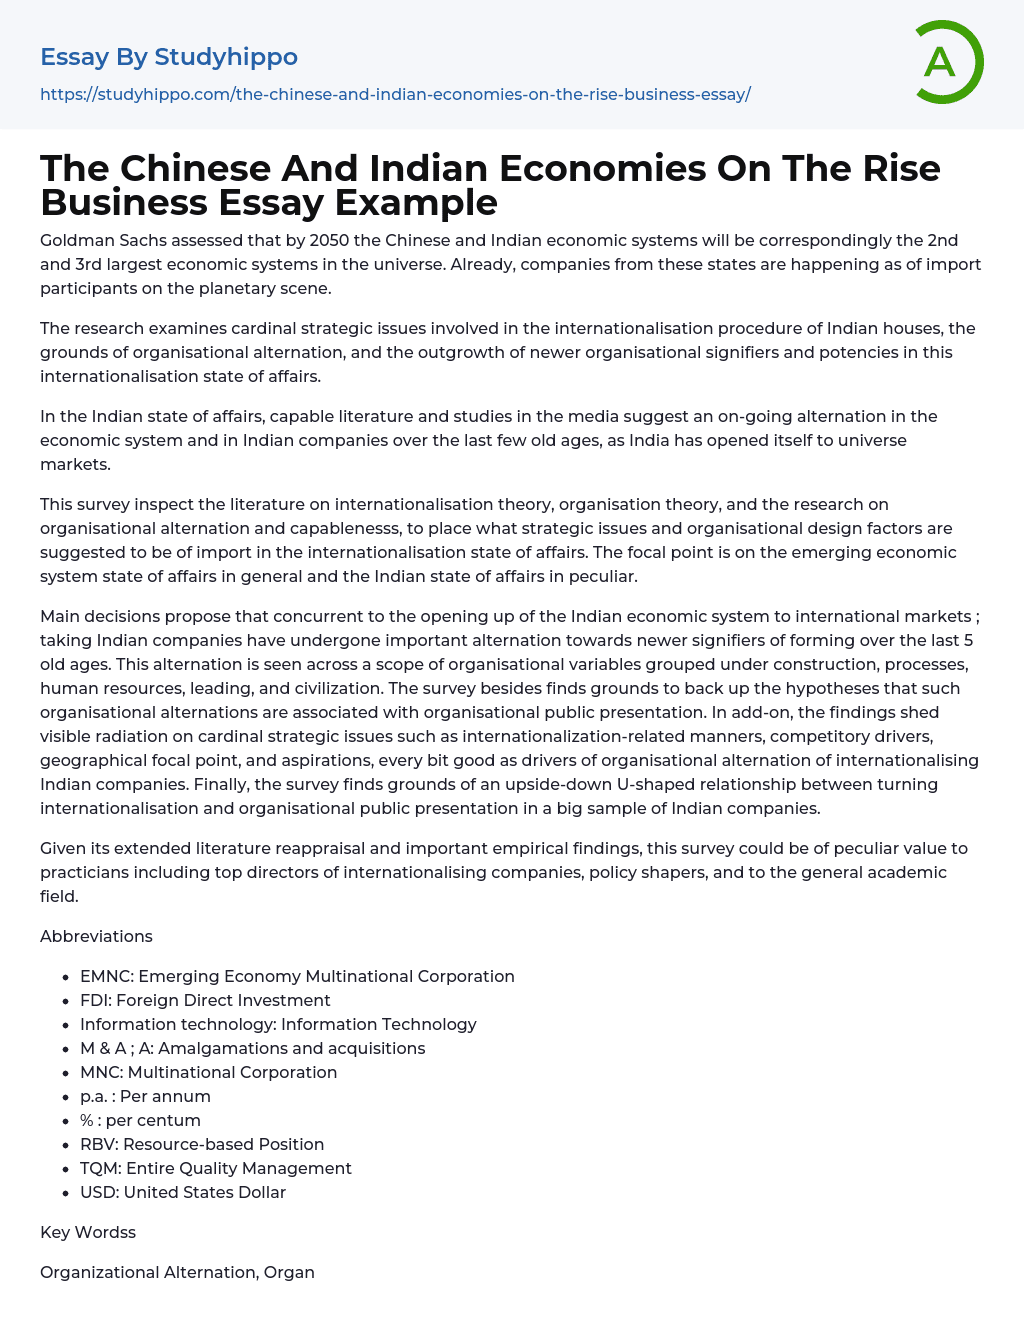 The Chinese And Indian Economies On The Rise Business Essay Example